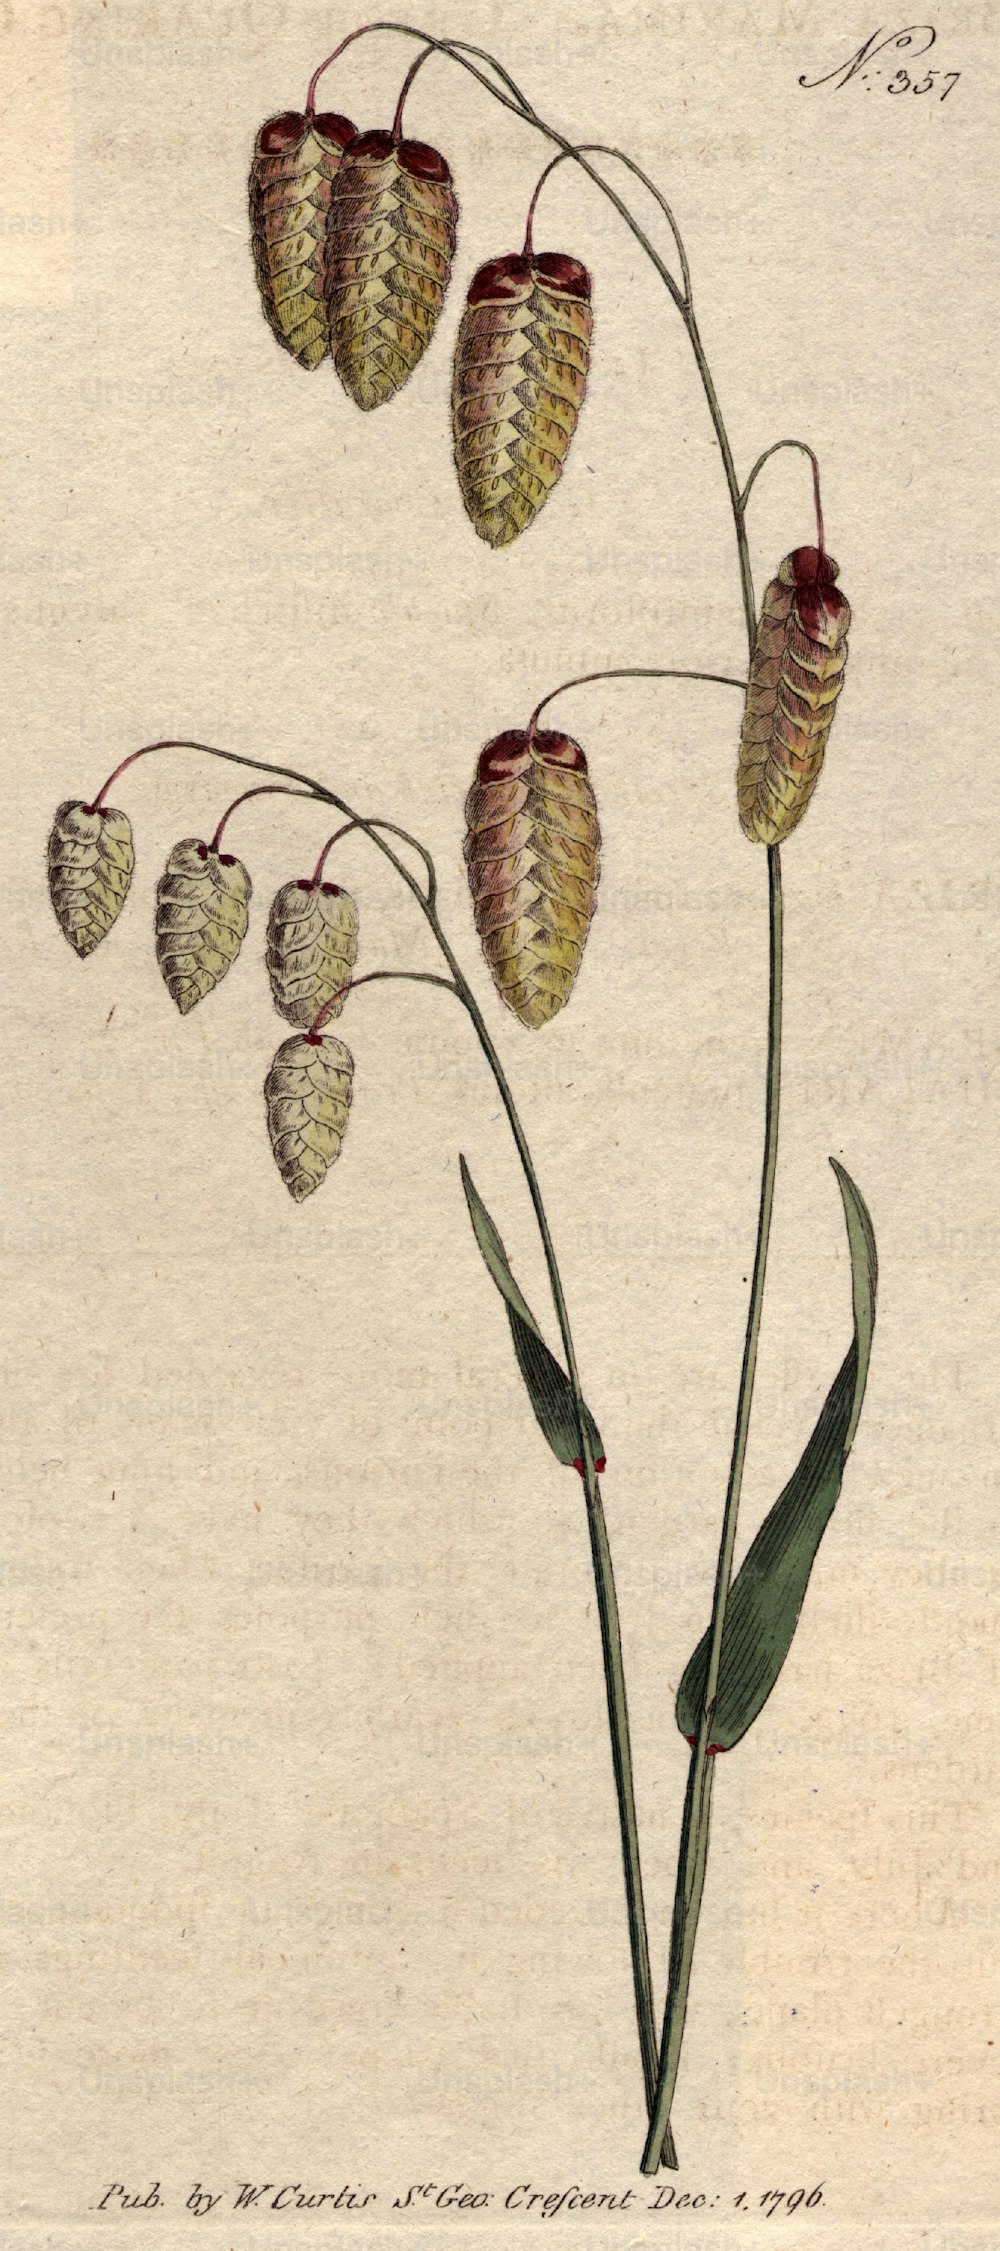 1796:  Grass with seeds.  Curtis' Botanical Magazine - pub. 1796  (Photo by Hulton Archive/Getty Images)